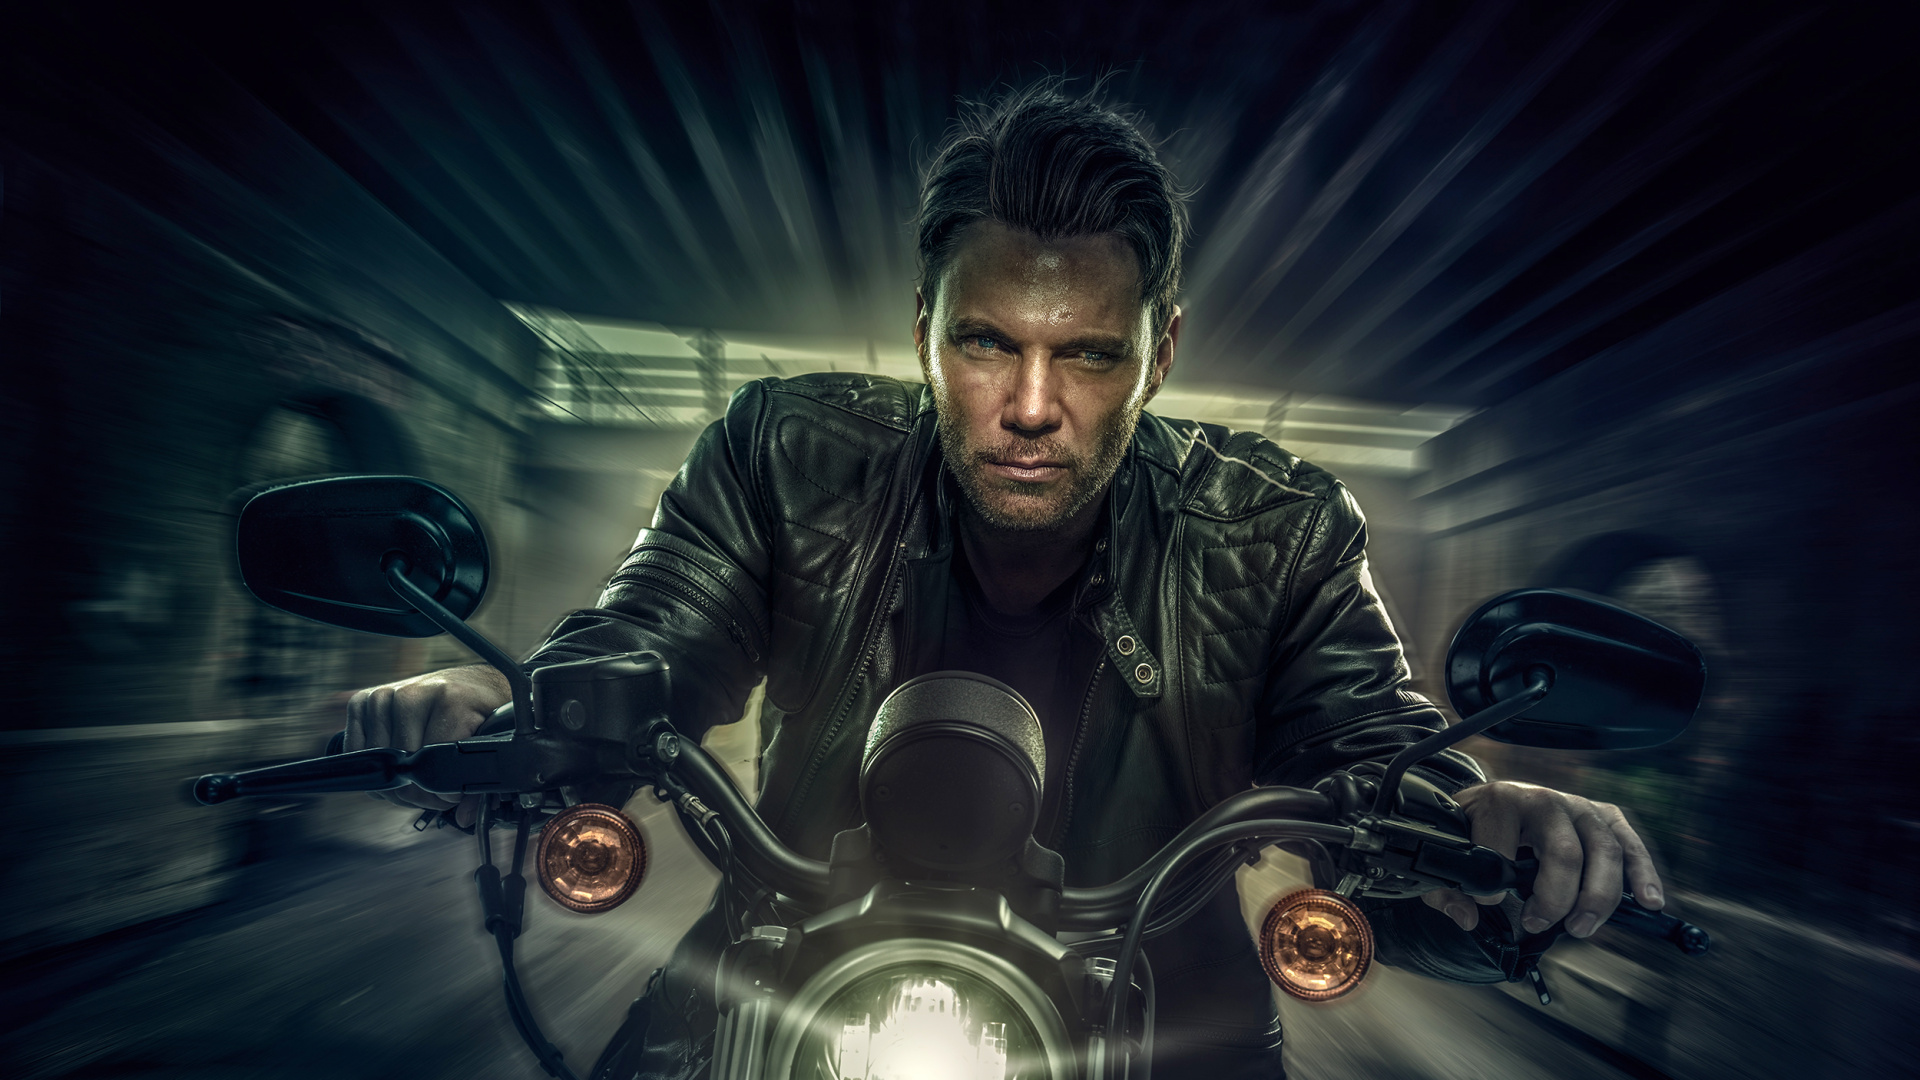 Man in Black Leather Jacket Riding Motorcycle. Wallpaper in 1920x1080 Resolution